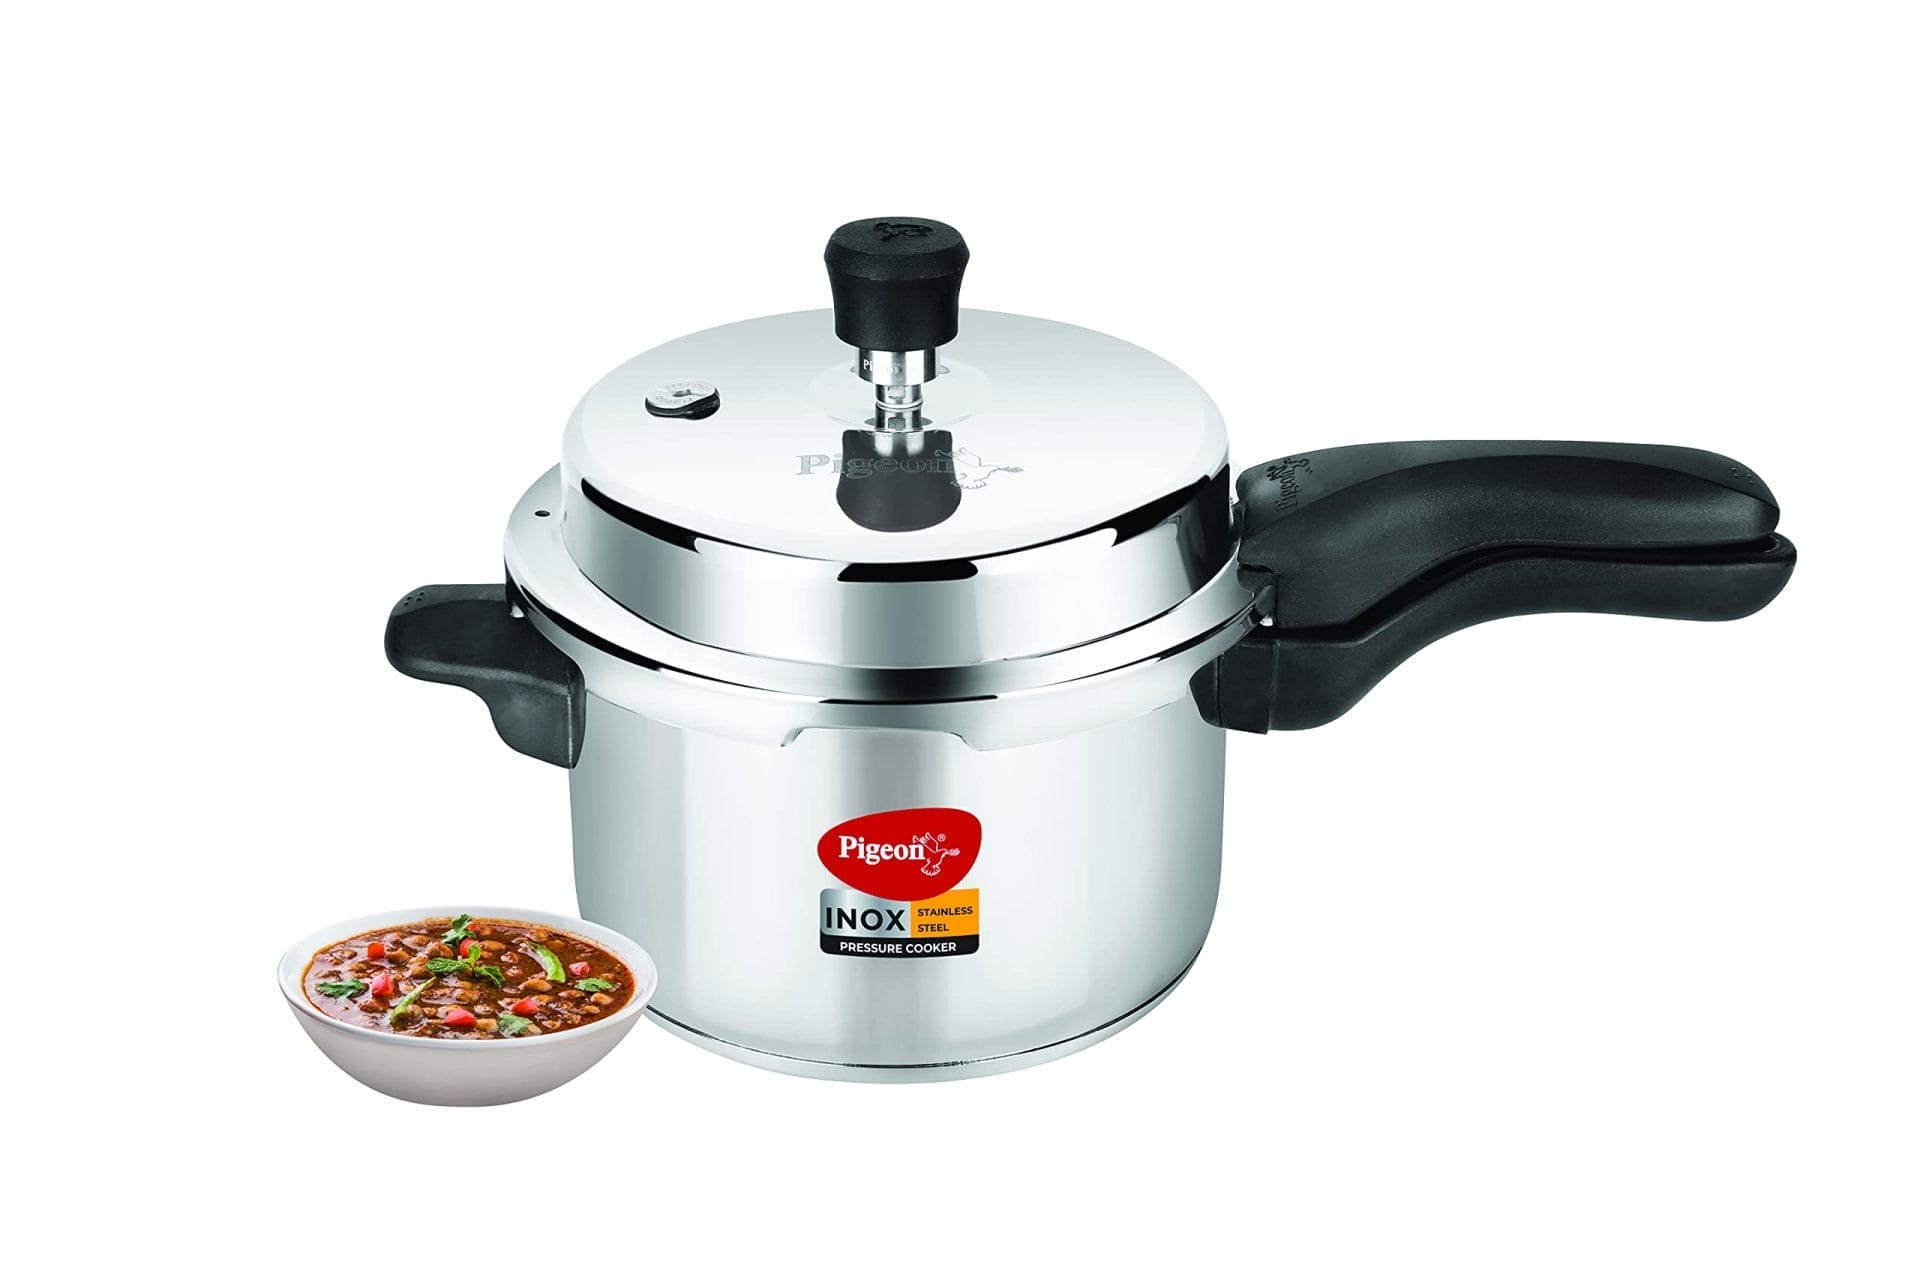 10 best stainless steel pressure cookers tested reviewed 1145 24 6